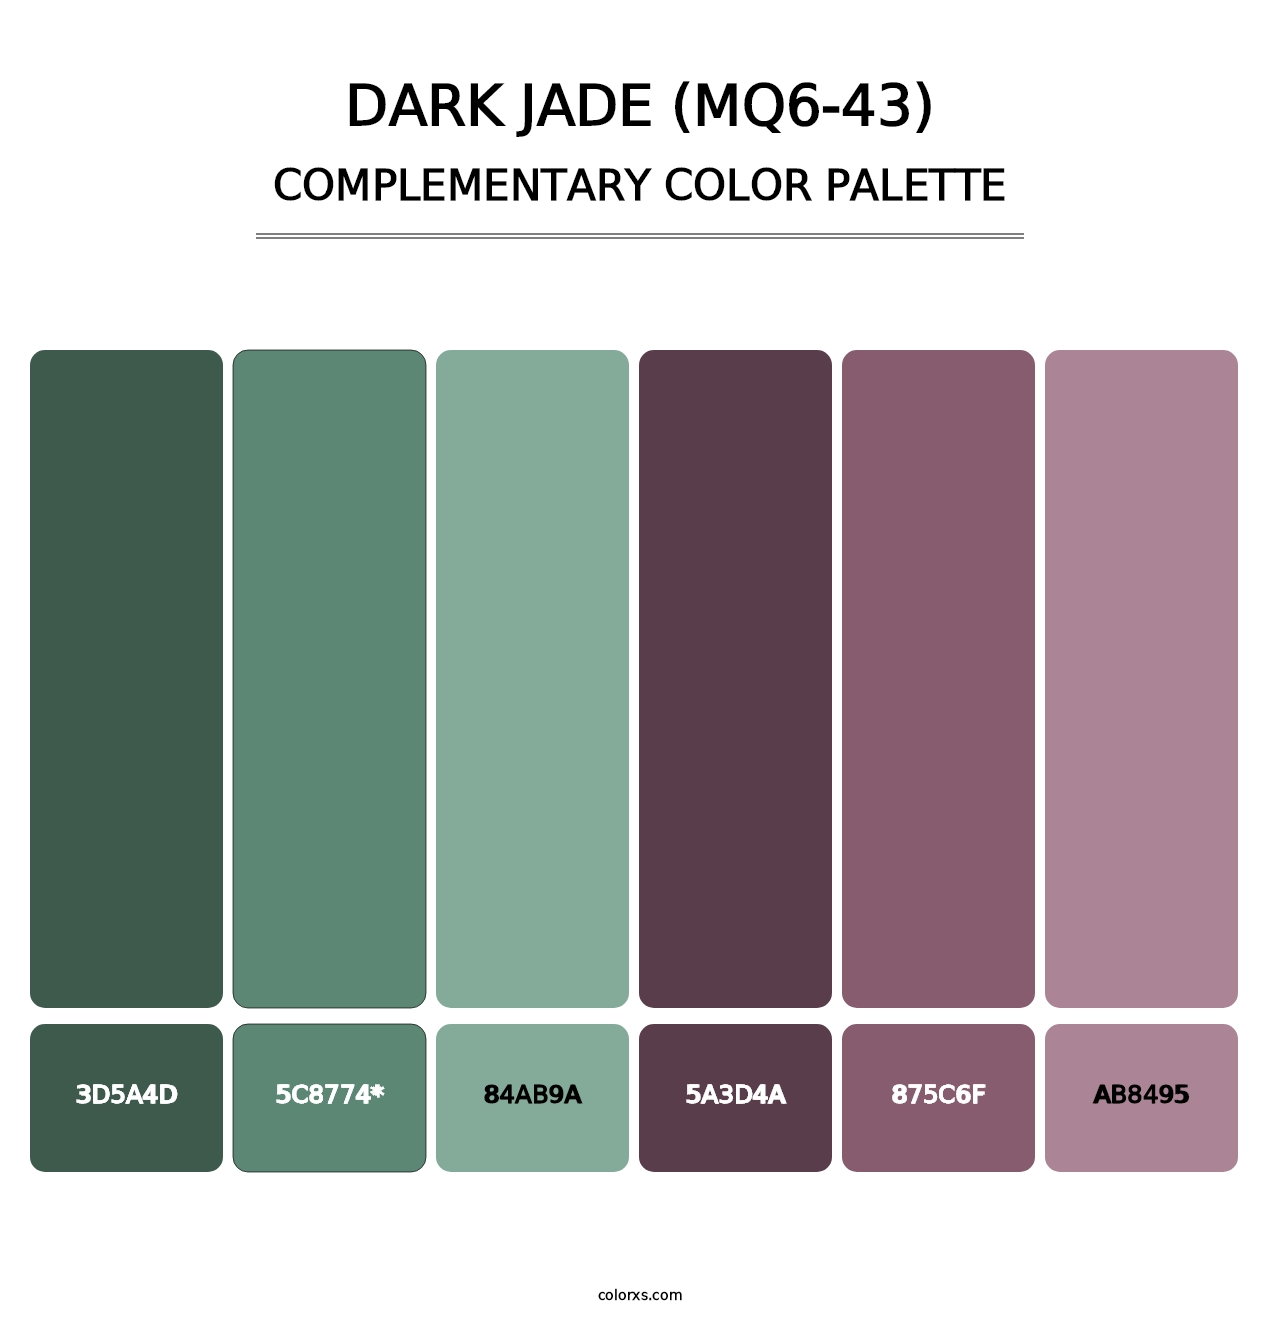 Dark Jade (MQ6-43) - Complementary Color Palette